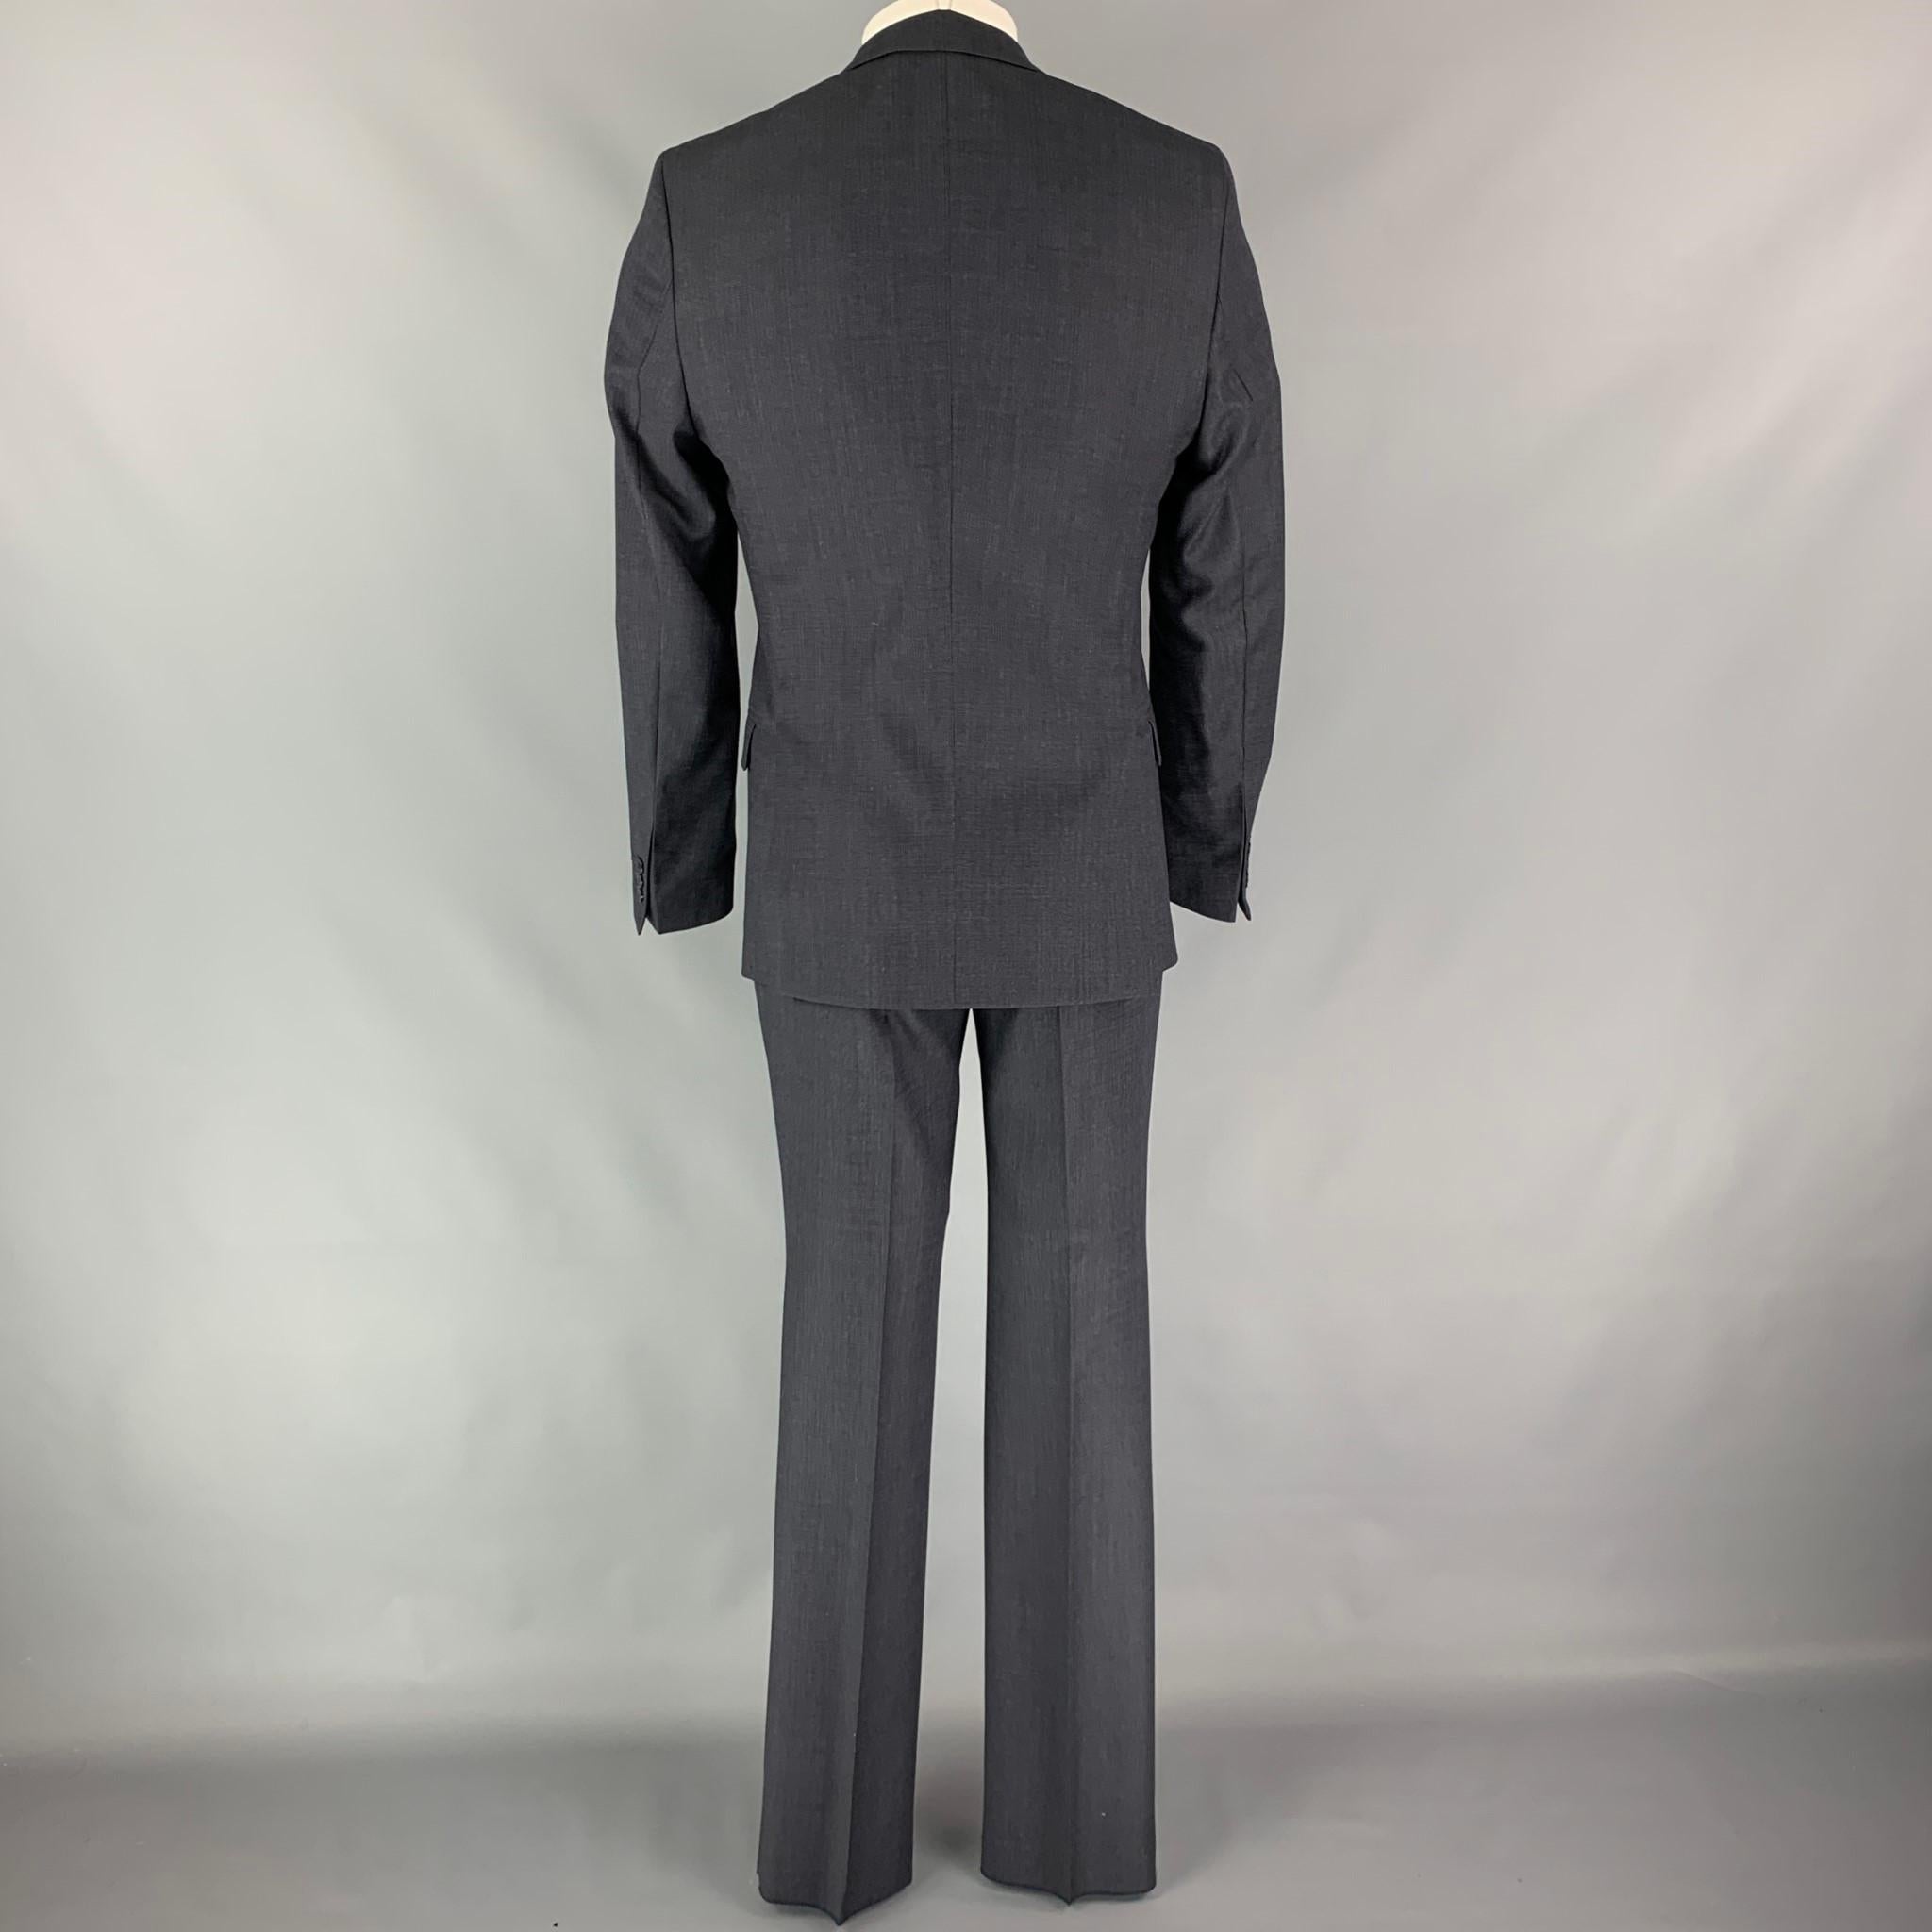 Black VERSACE COLLECTION Size 38 Charcoal Wool Single Breasted Notch Lapel Suit